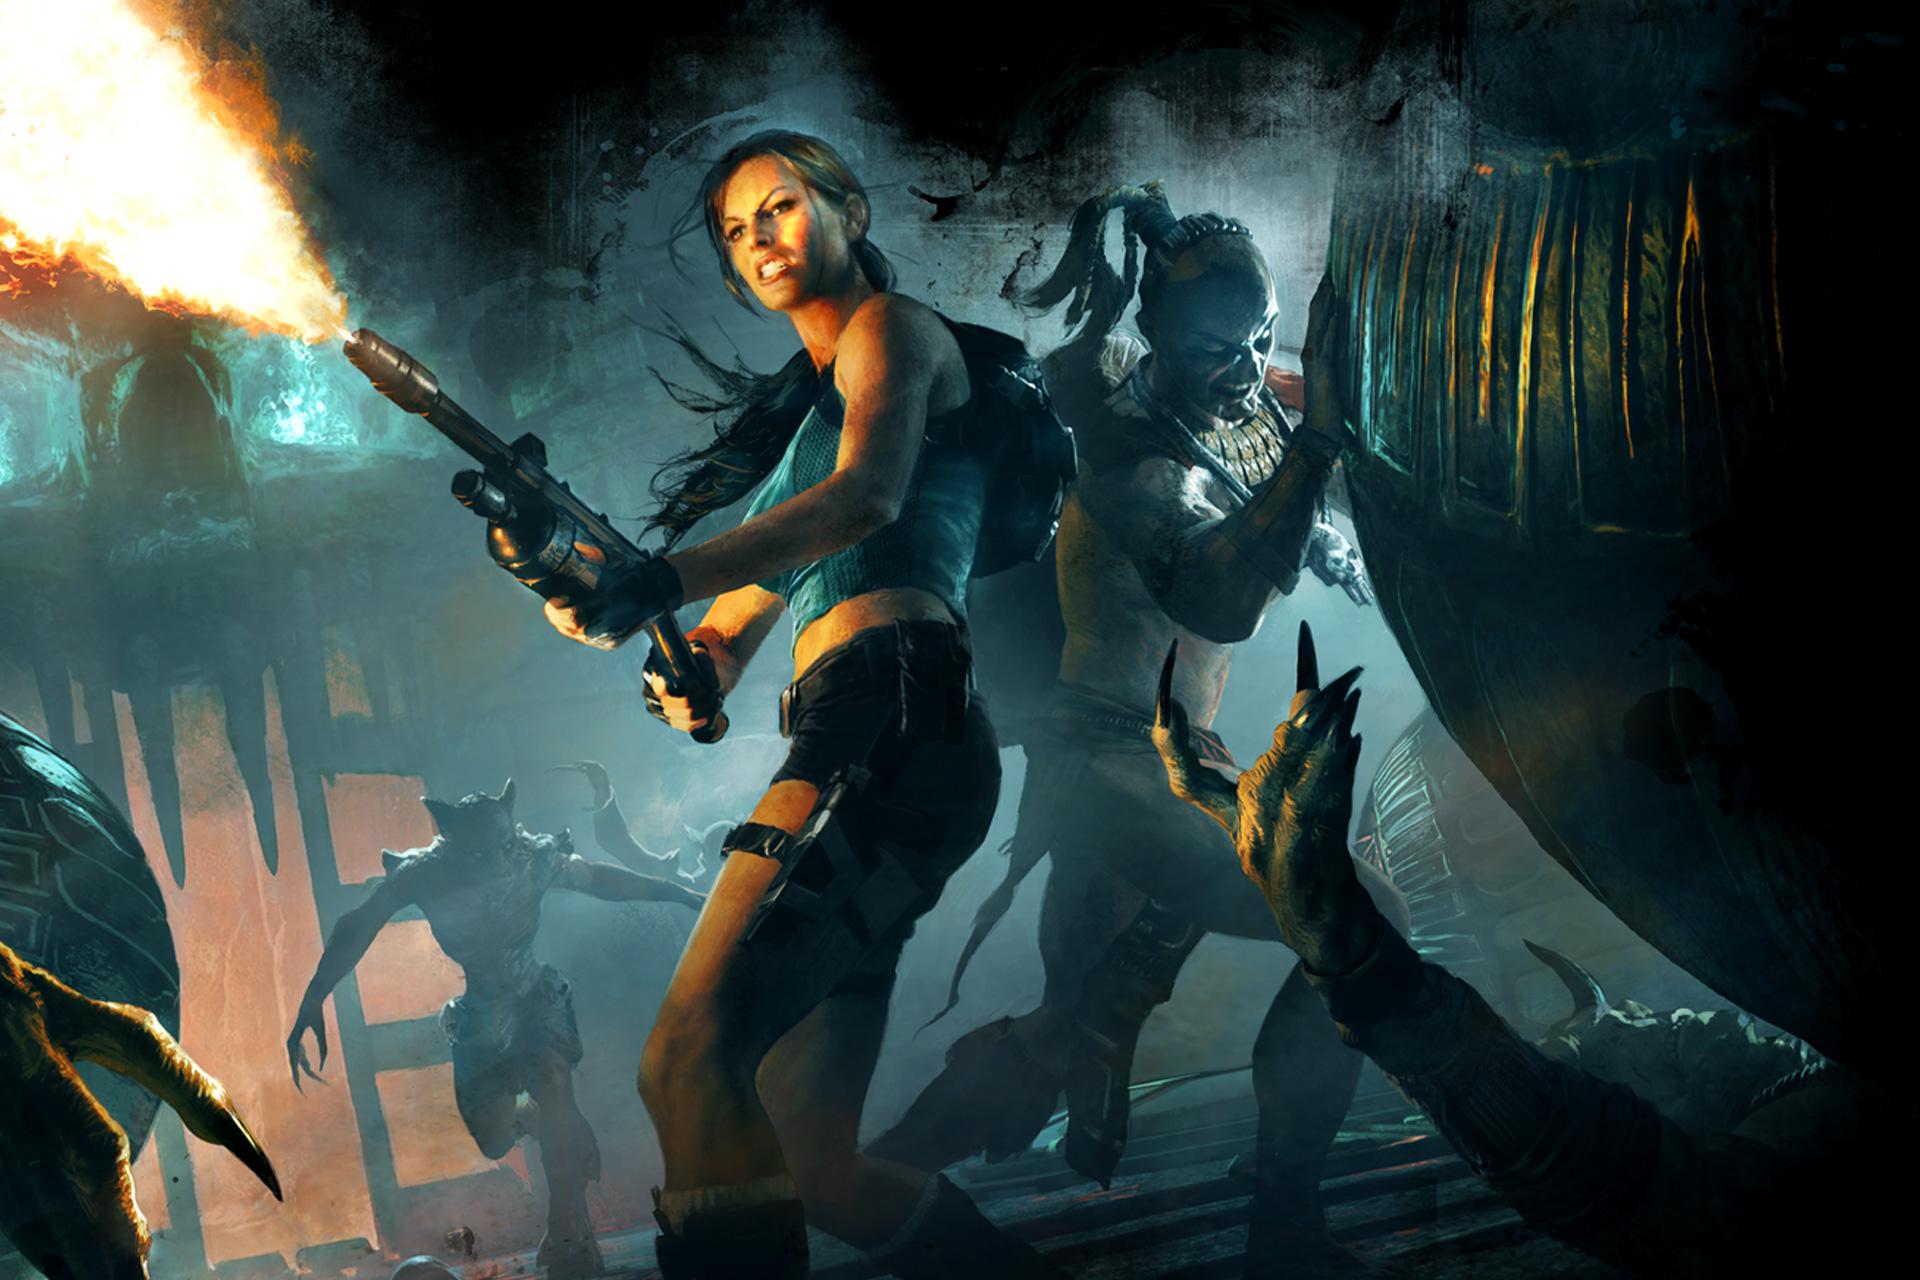 Lara Croft holding a flamethrower in a dark and moody room. 